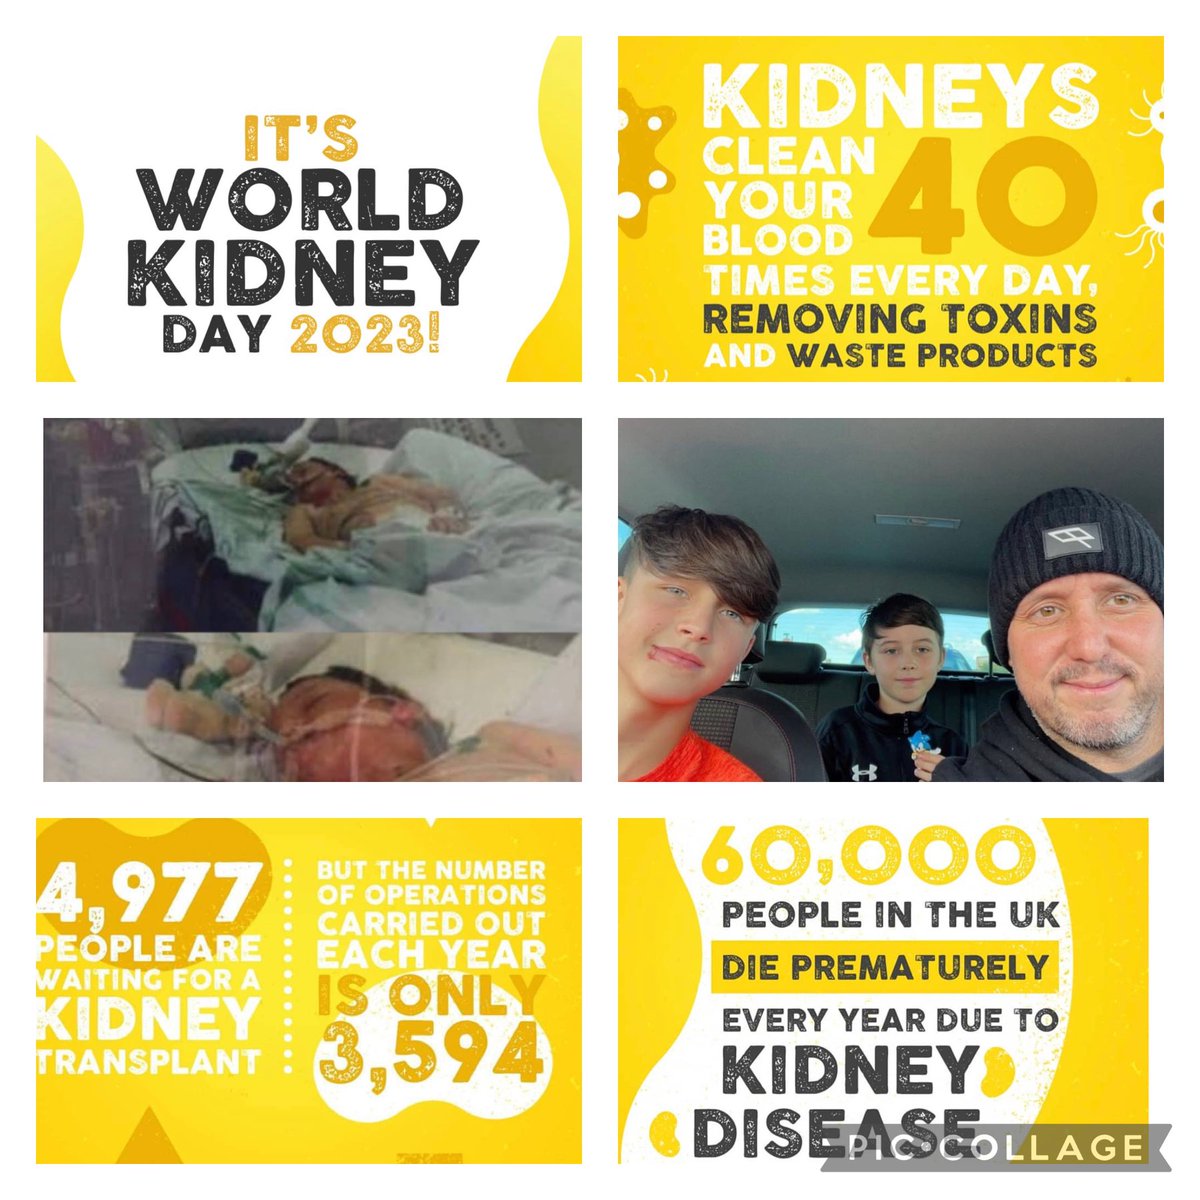 World kidney day, every day blessed and lucky, gift of life transplanted 24 years ago going strong. #kidneysmatter #kidneydisease #worldkidneyday #health #awareness #giftoflife #lucky #donor #kidneysurgery #kidneydiseaseawareness @kidneydayUK